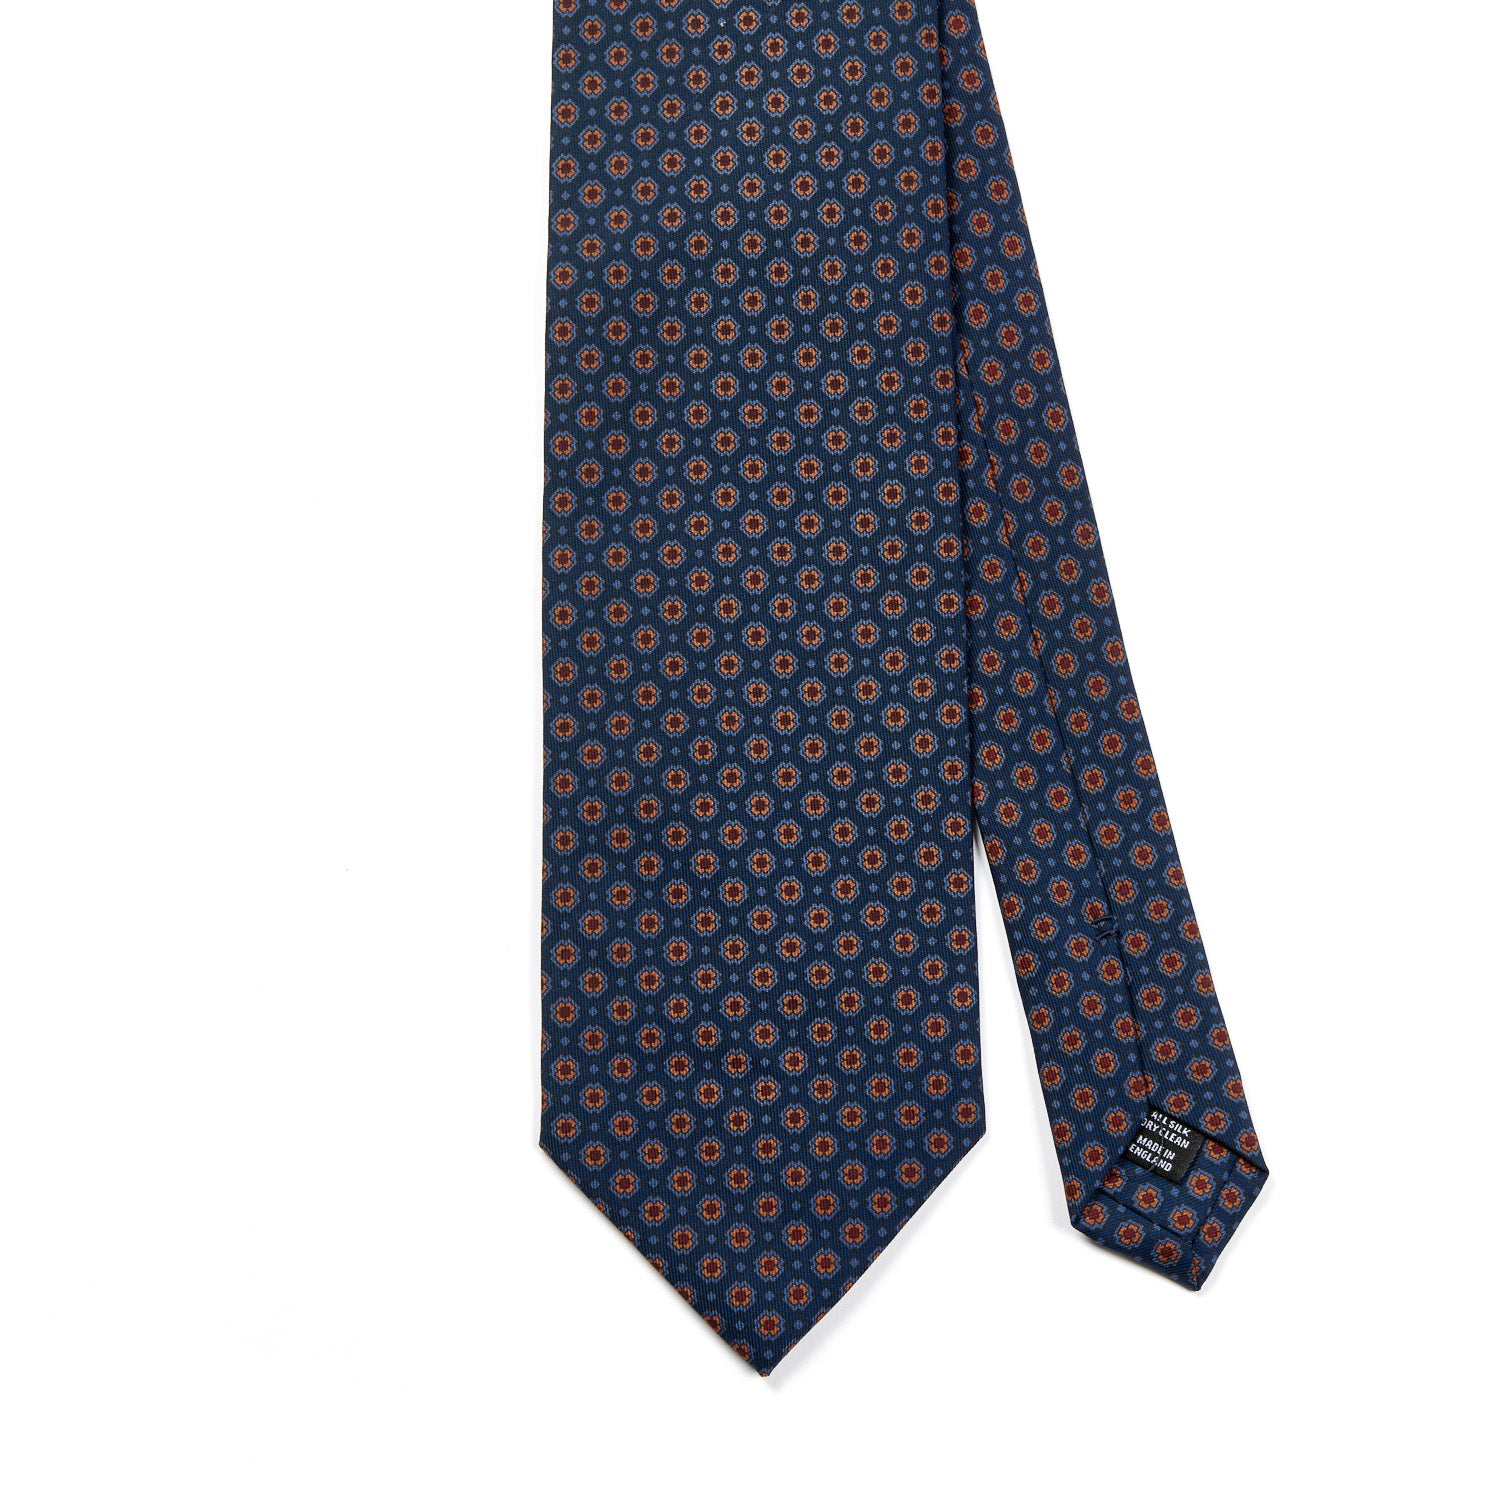 A Sovereign Grade Blue Small Floral Ancient Madder tie, handmade in the United Kingdom, by KirbyAllison.com.